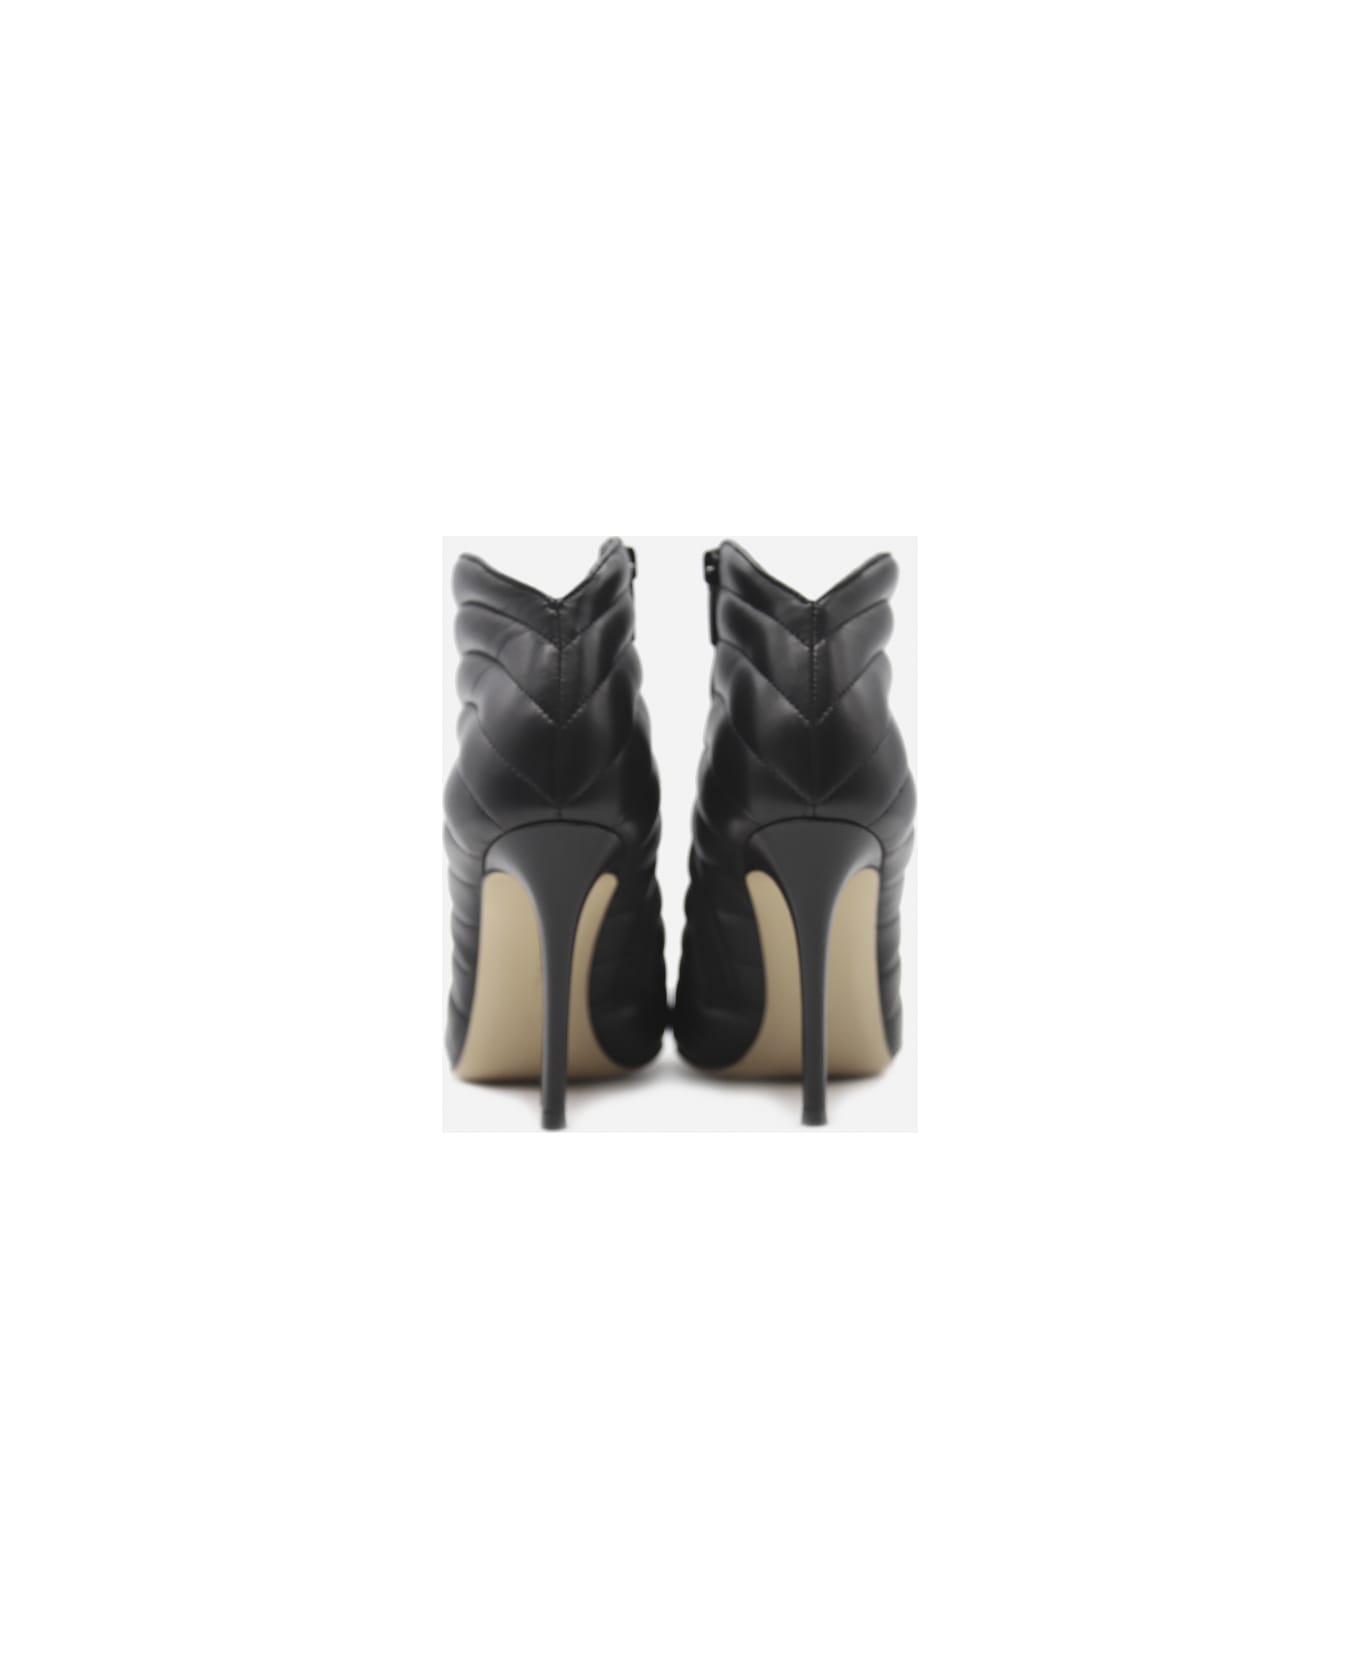 Gianvito Rossi Eiko Ankle Boots In Matelassé Effect Leather - Black